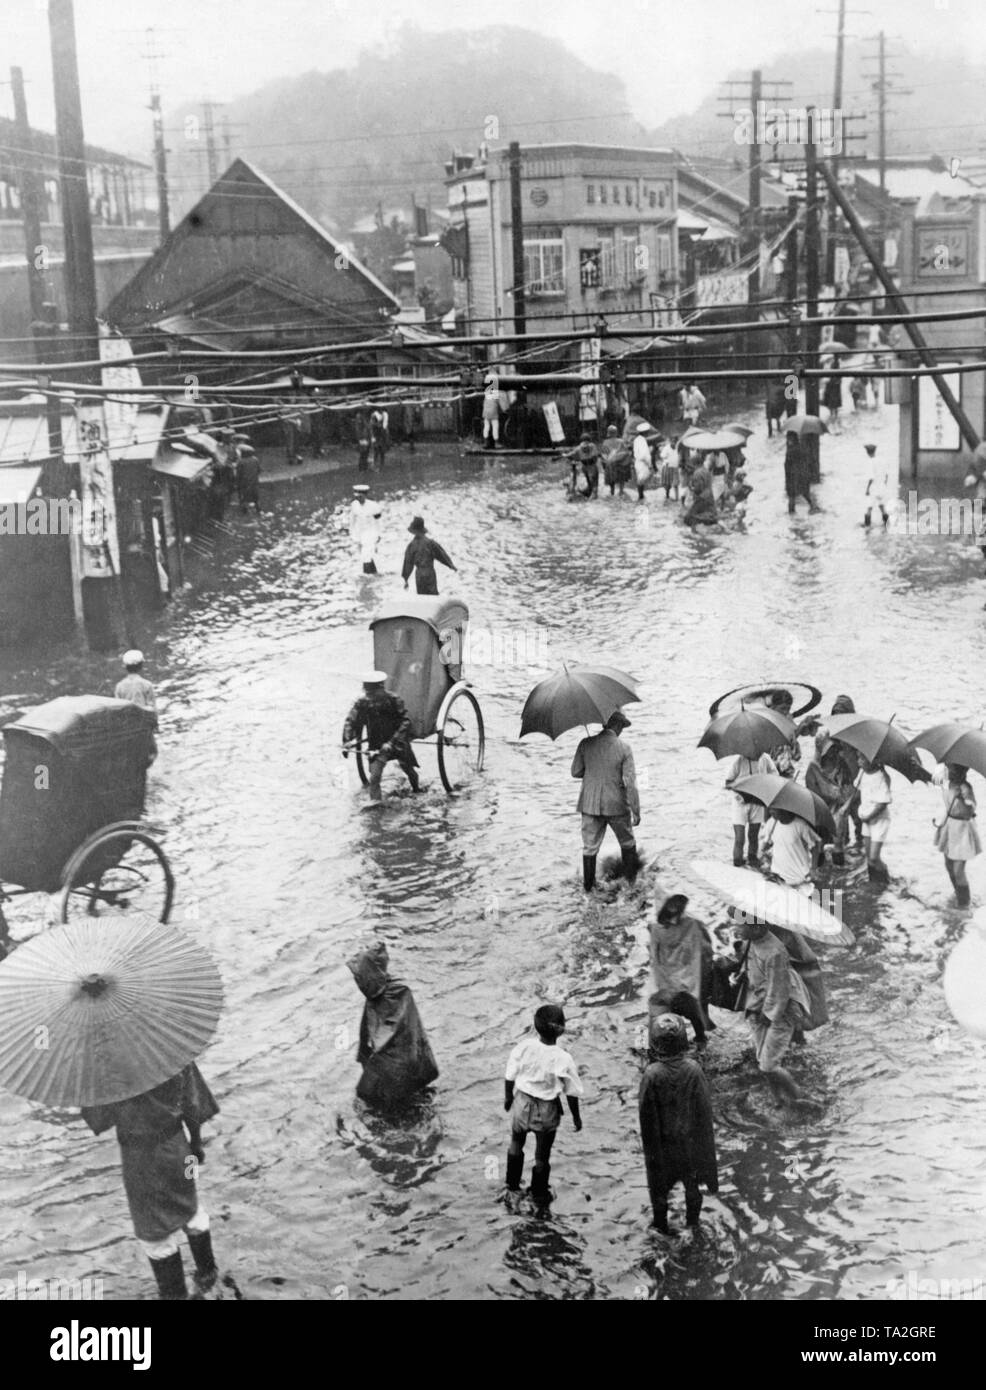 After a storm in Japan, a street in Tokyo is under water. Many people wade through the water. Stock Photo